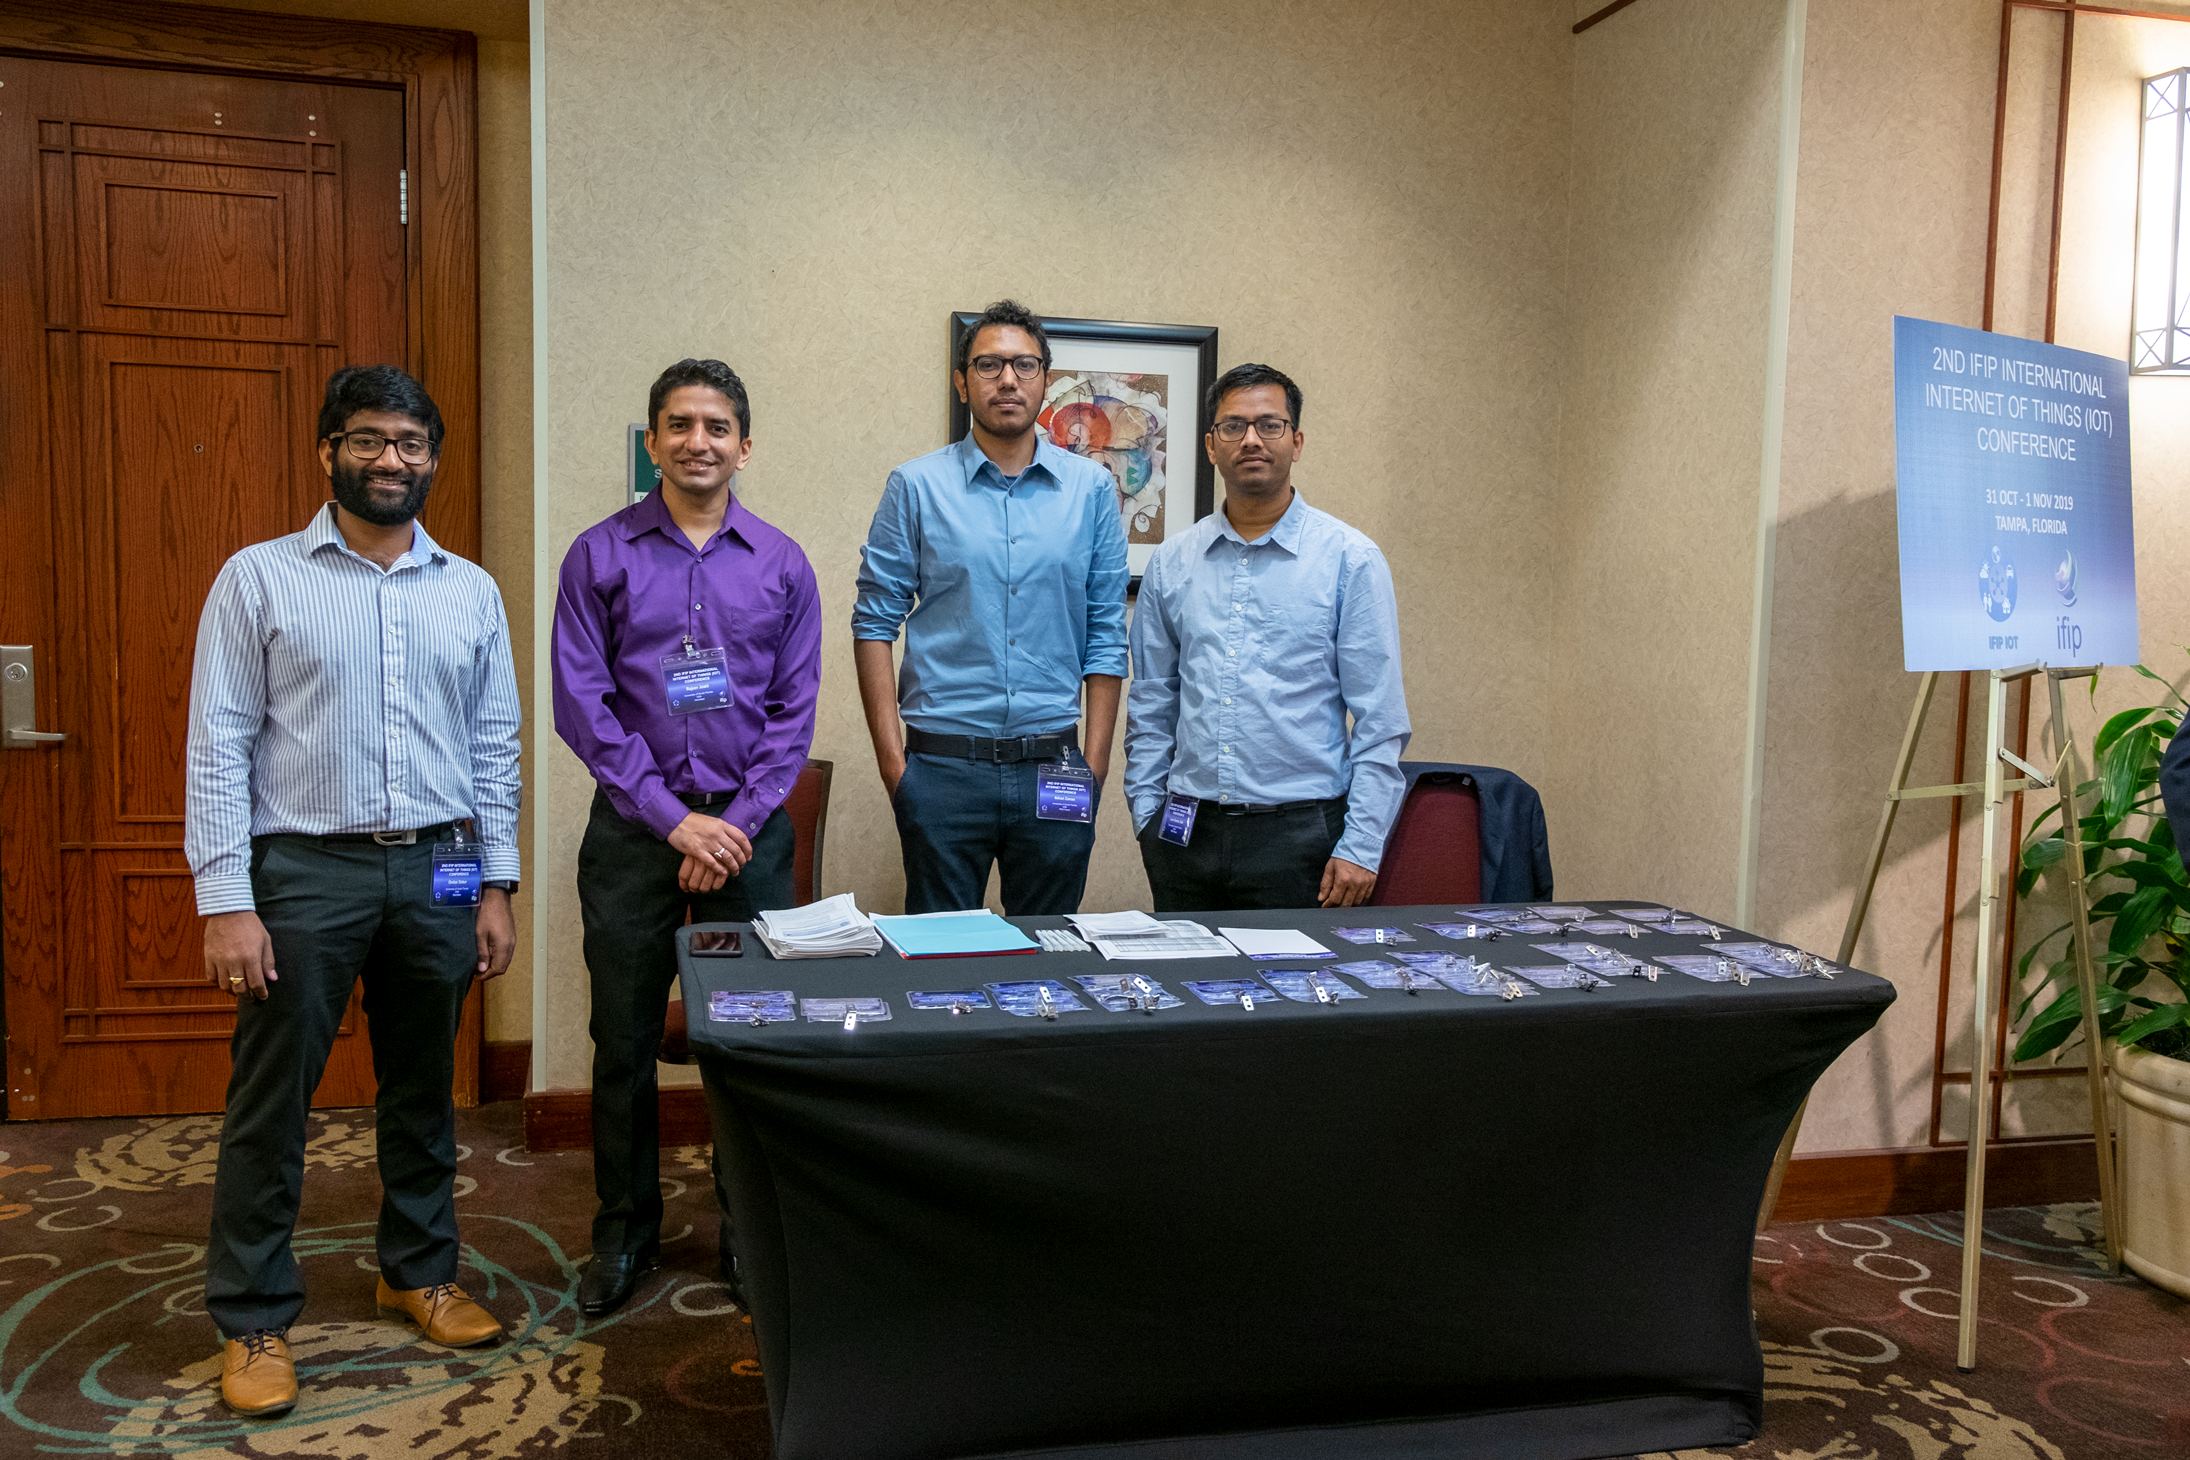 USF Ph.D.s at IFIP IoT Conference 2019